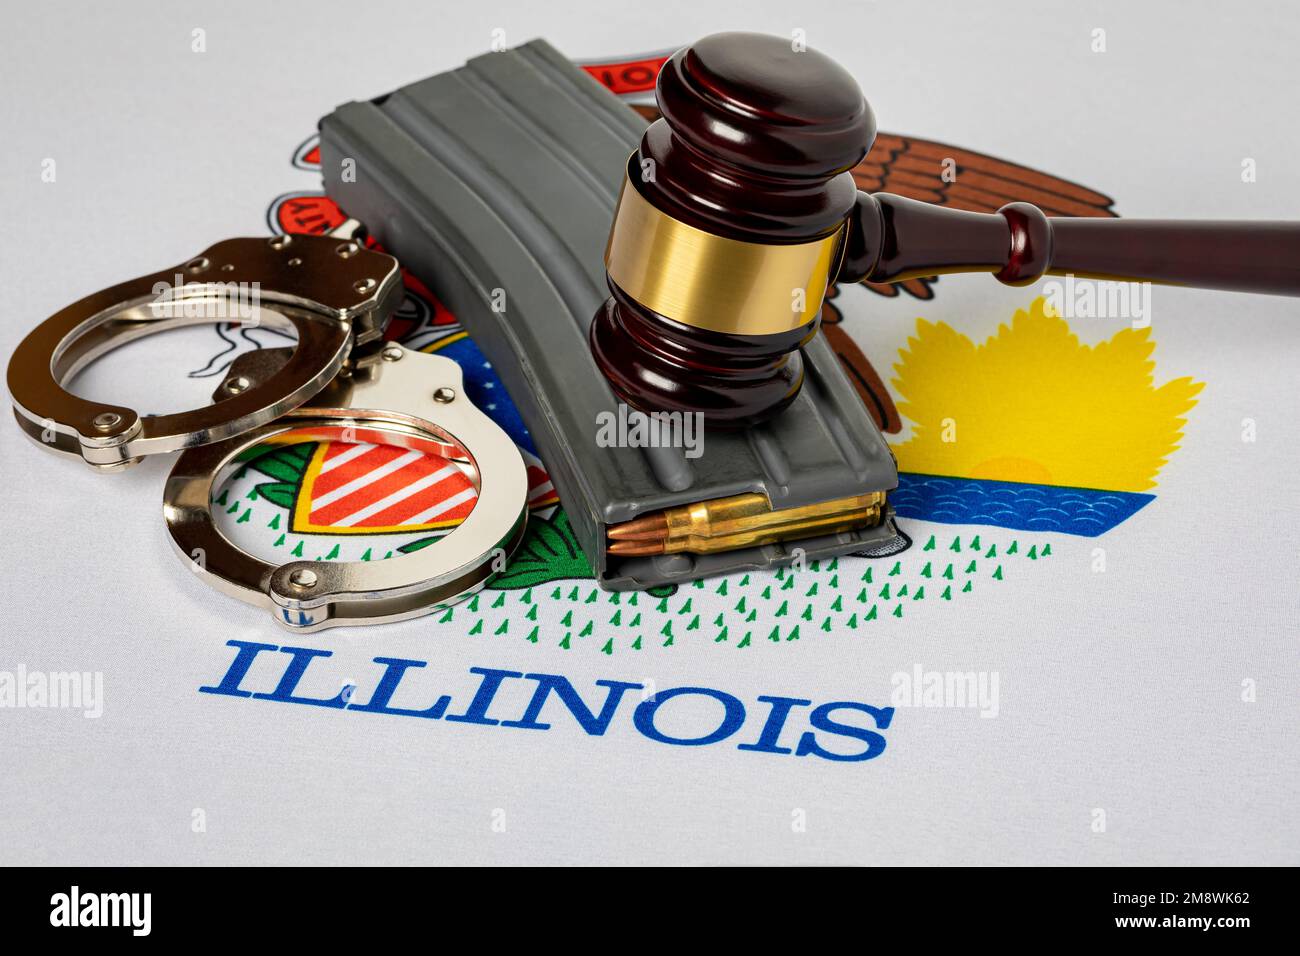 Assault weapon high-capacity magazine with gavel and Illinois state flag. Semi-automatic rifle ban, gun control law and crime concept. Stock Photo